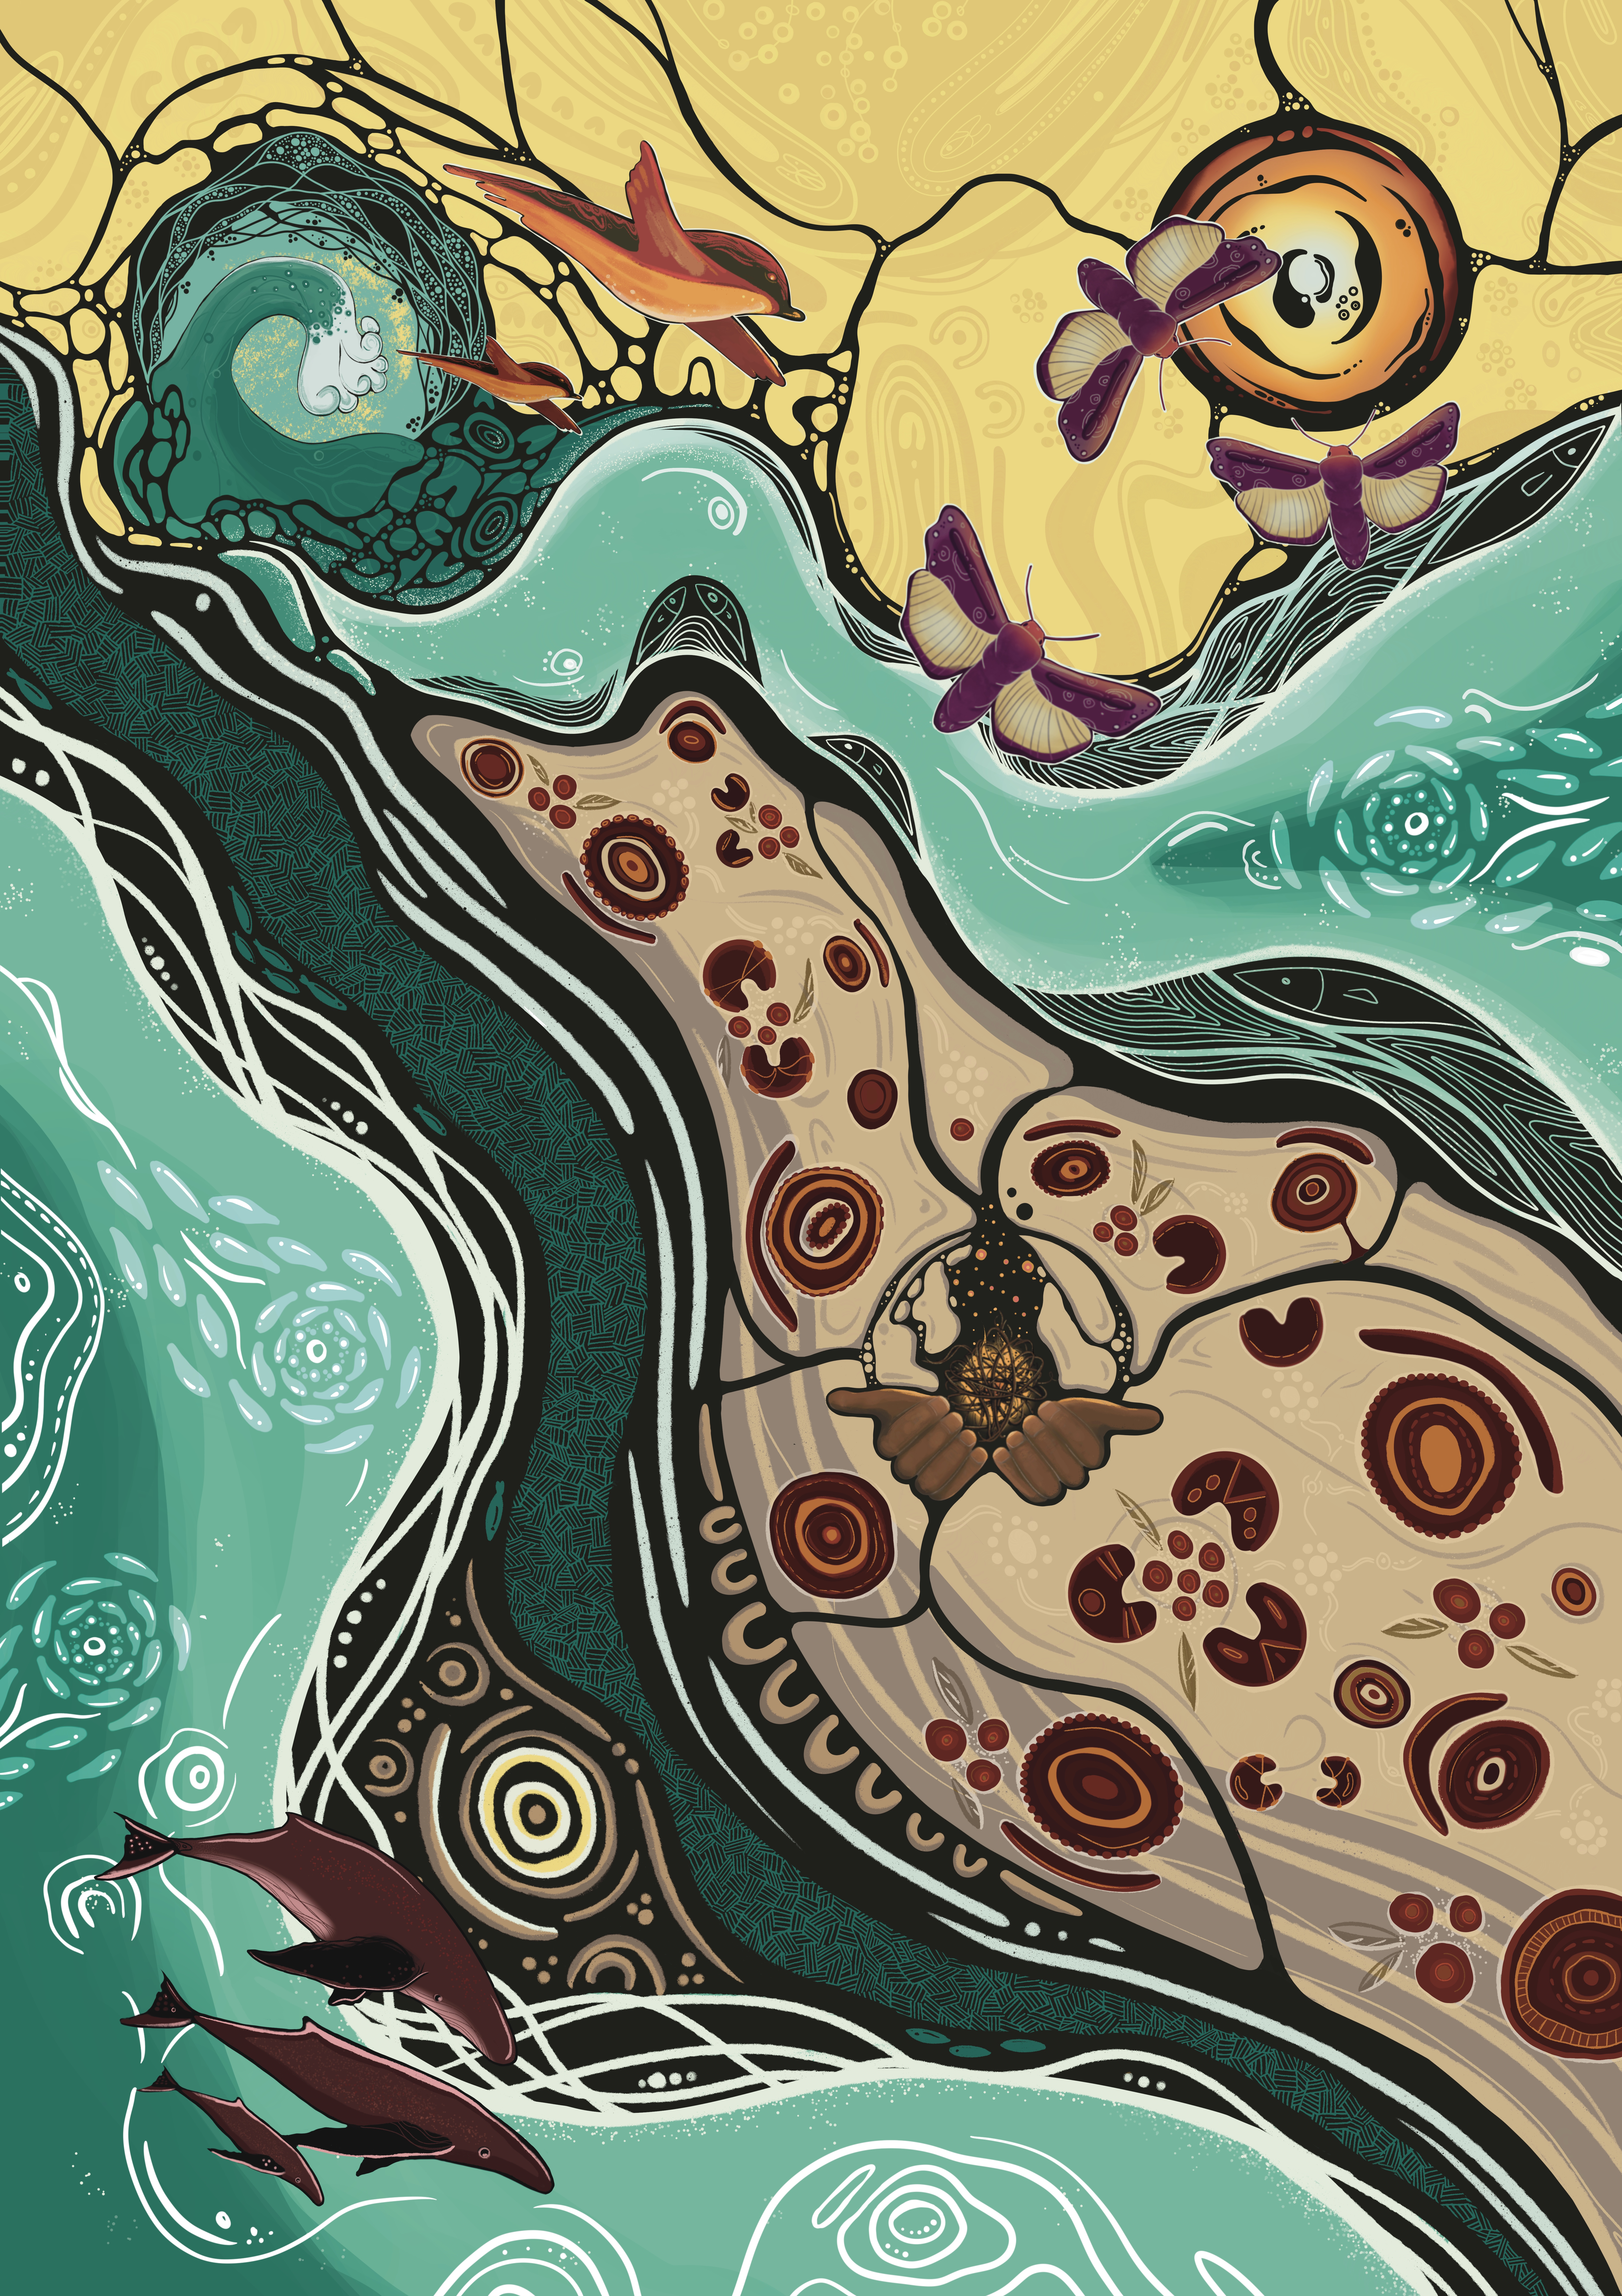 An excerpt of 'Manawaradhanjin', an artwork created by Aboriginal artist Leanne Brook for Natural Hazards Research Australia. The excerpt shows the light green ocean, dark green coast and brown soil of Australia, with motifs for community, knowledge sharing and caring for Country included.